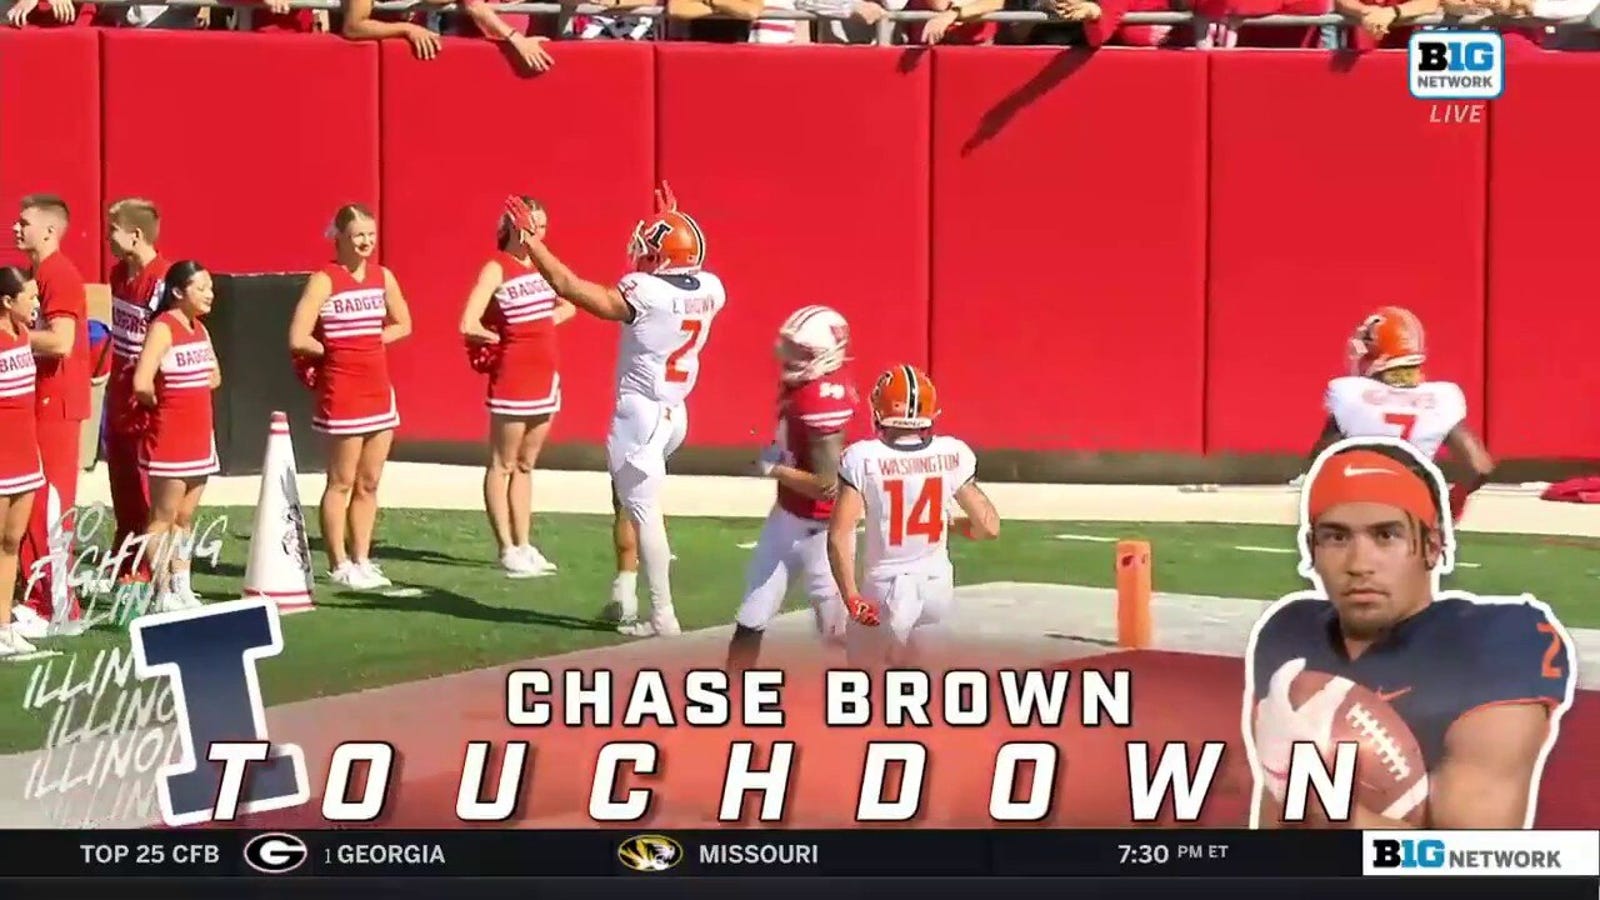 Chase Brown burns Wisconsin with 49-yard TD